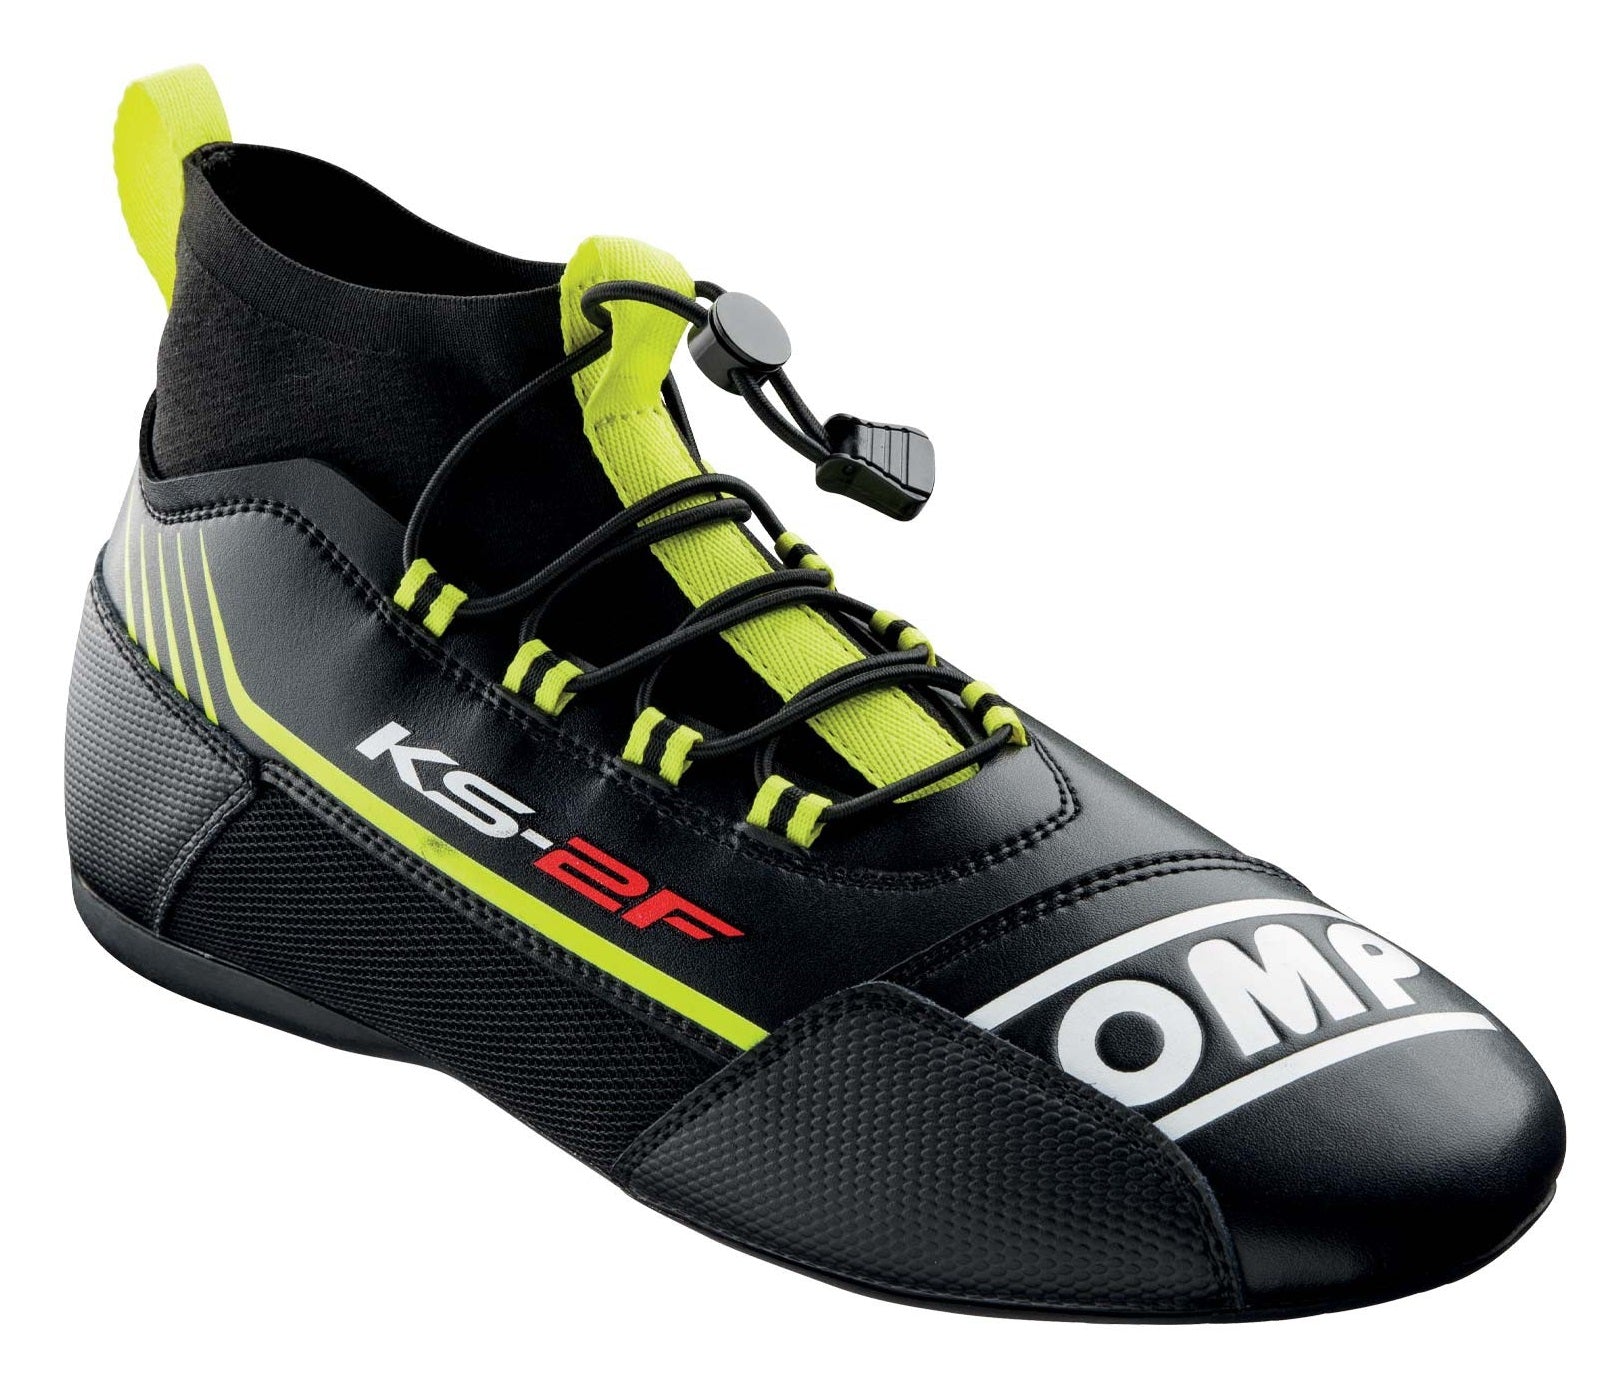 OMP KC0-0830-A01-178-41 KS-2F Karting shoes, black/fluo yellow, size 41 Photo-0 